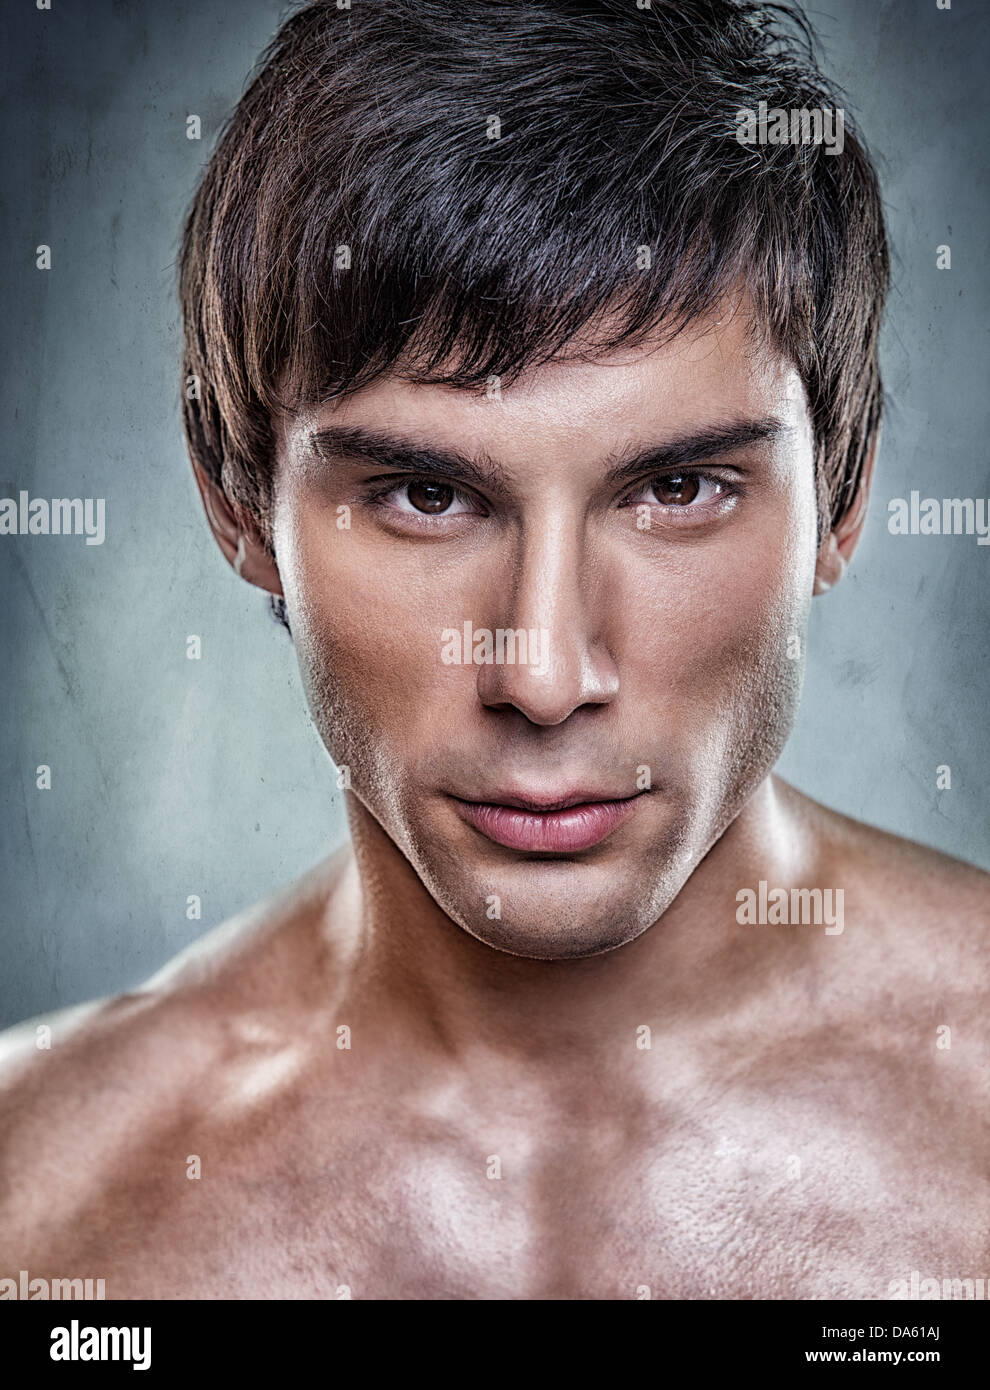 A handsome model posing in front of a gray background. Stock Photo